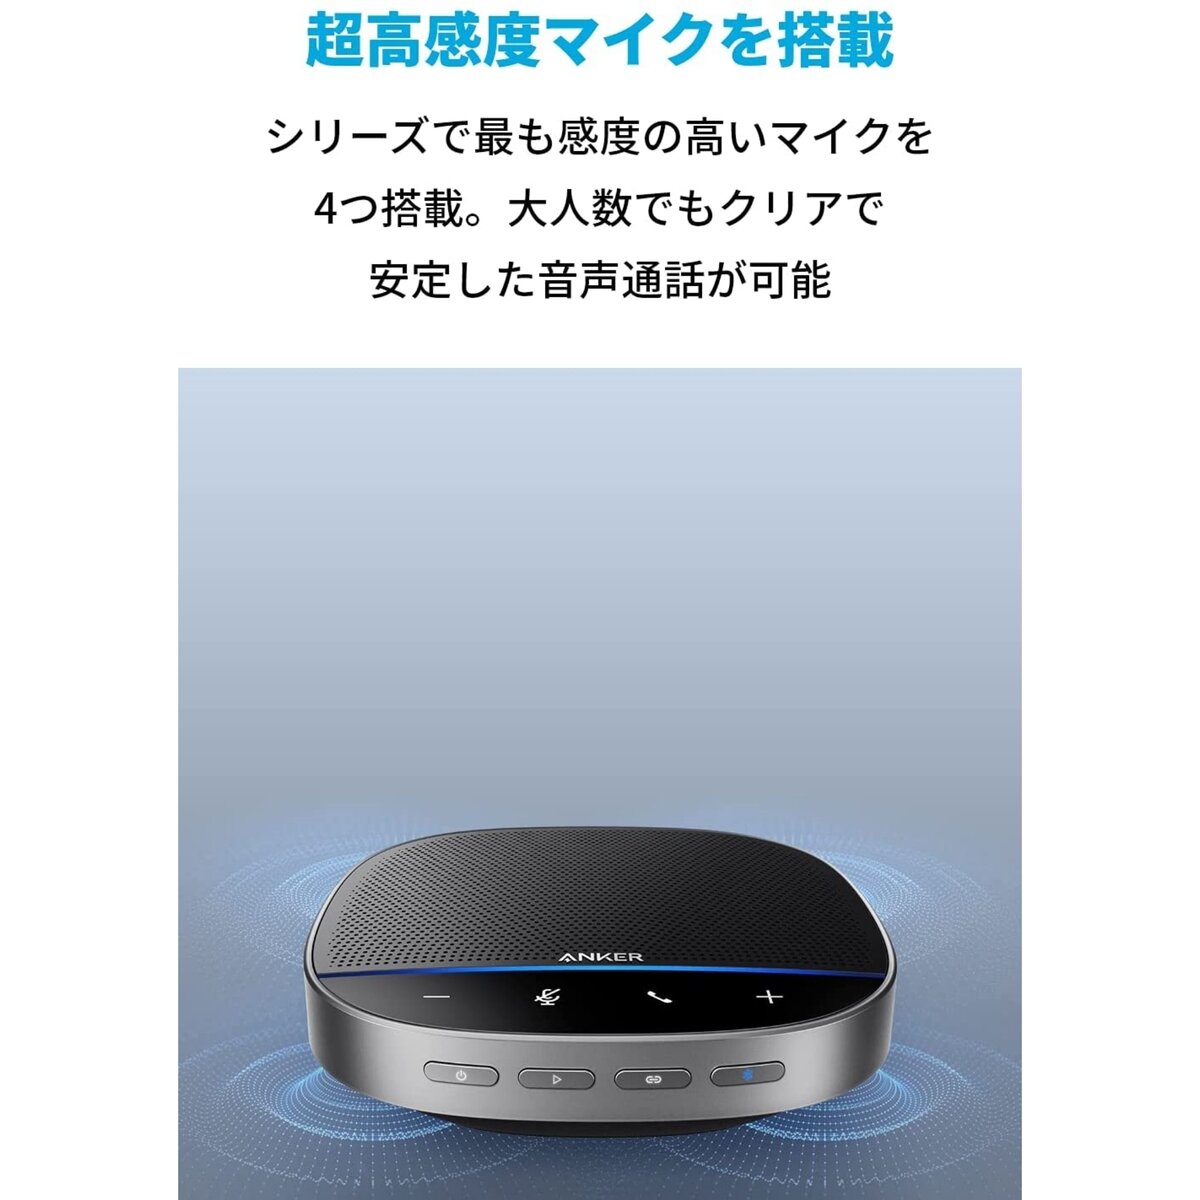 Anker 会議用スピーカー PowerConf S500   A3305011